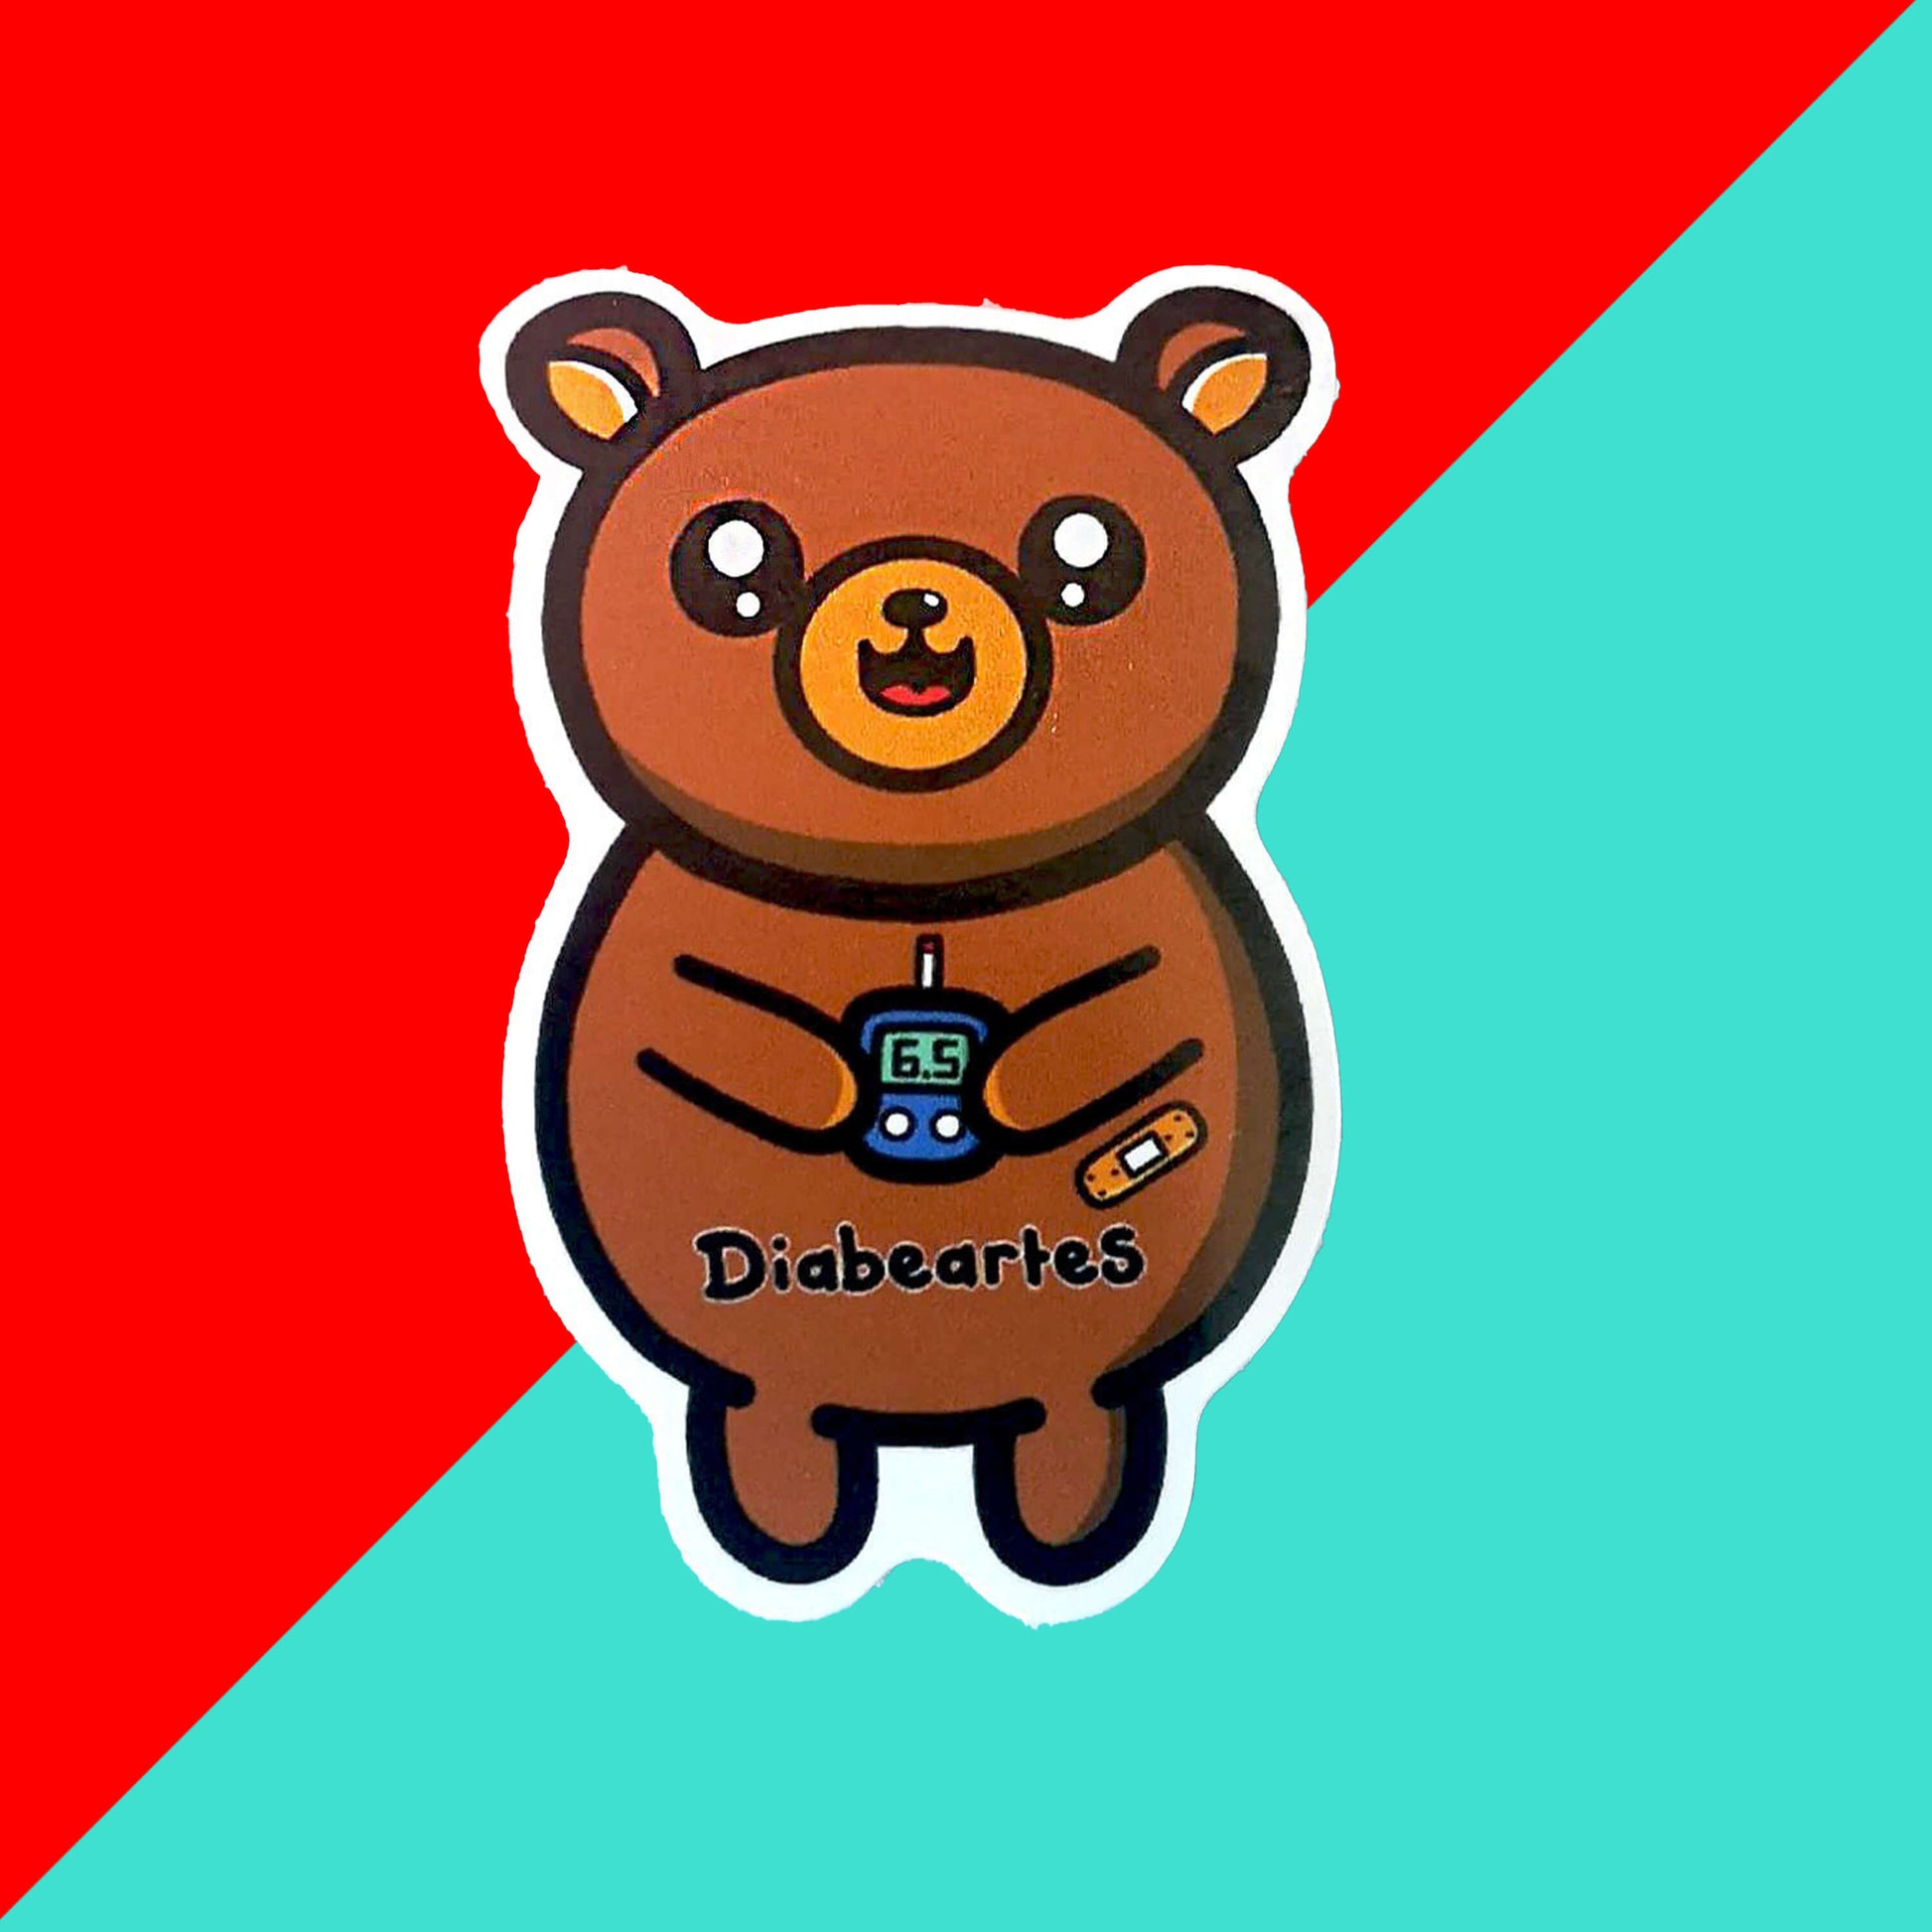 The Diabeartes Sticker - Diabetes on a red and blue background. The brown bear shaped sticker is smiling holding a blood glucose reader with a plaster on its arm, across its tummy reads 'diabeartes' in black. The design is raising awareness for those with type 1 diabetes and type 2 diabetes.